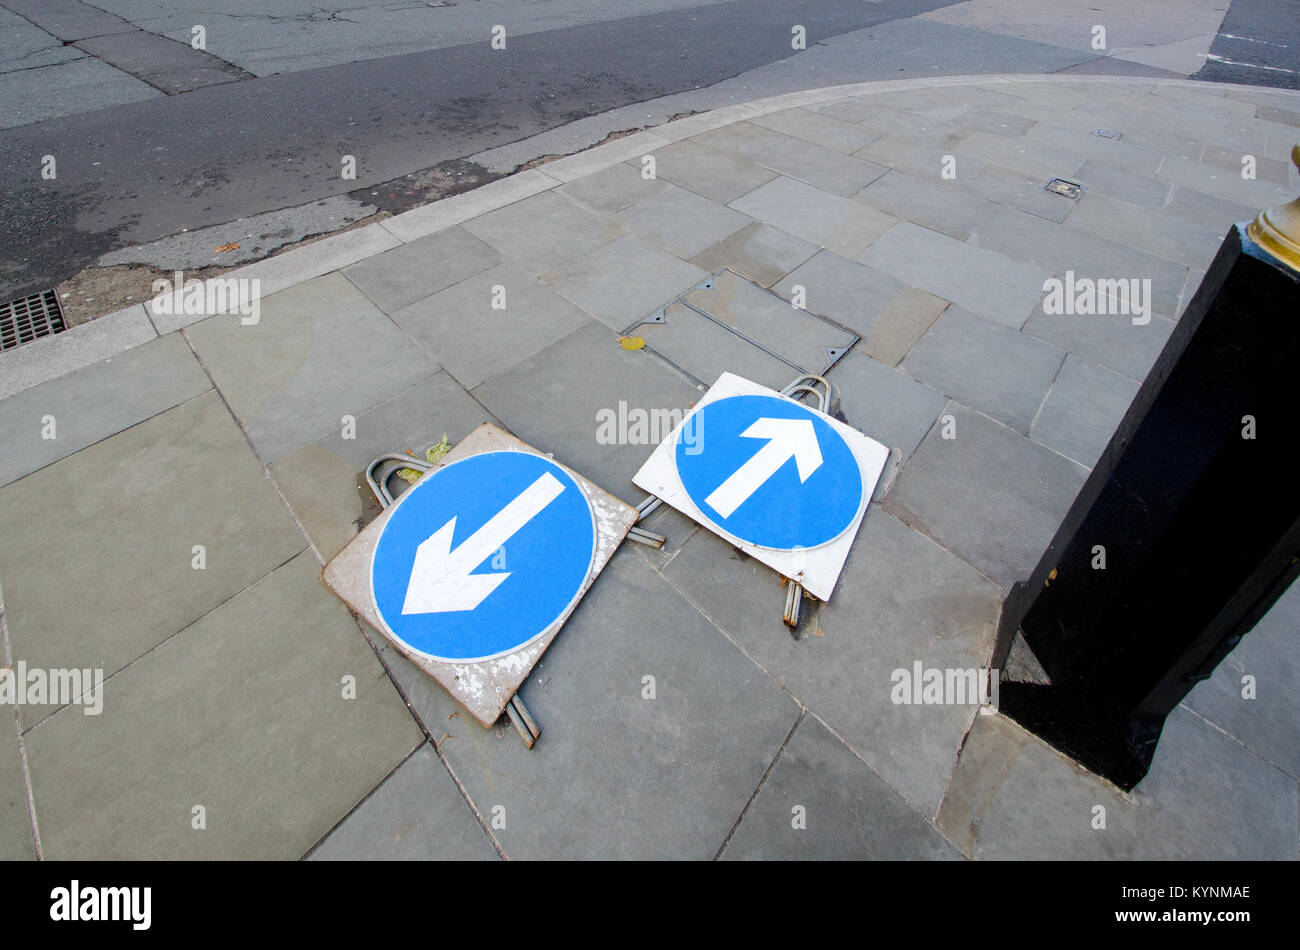 London, England, UK. Traffic arrow signs lying flat on the pavement pointing in different directions Stock Photo